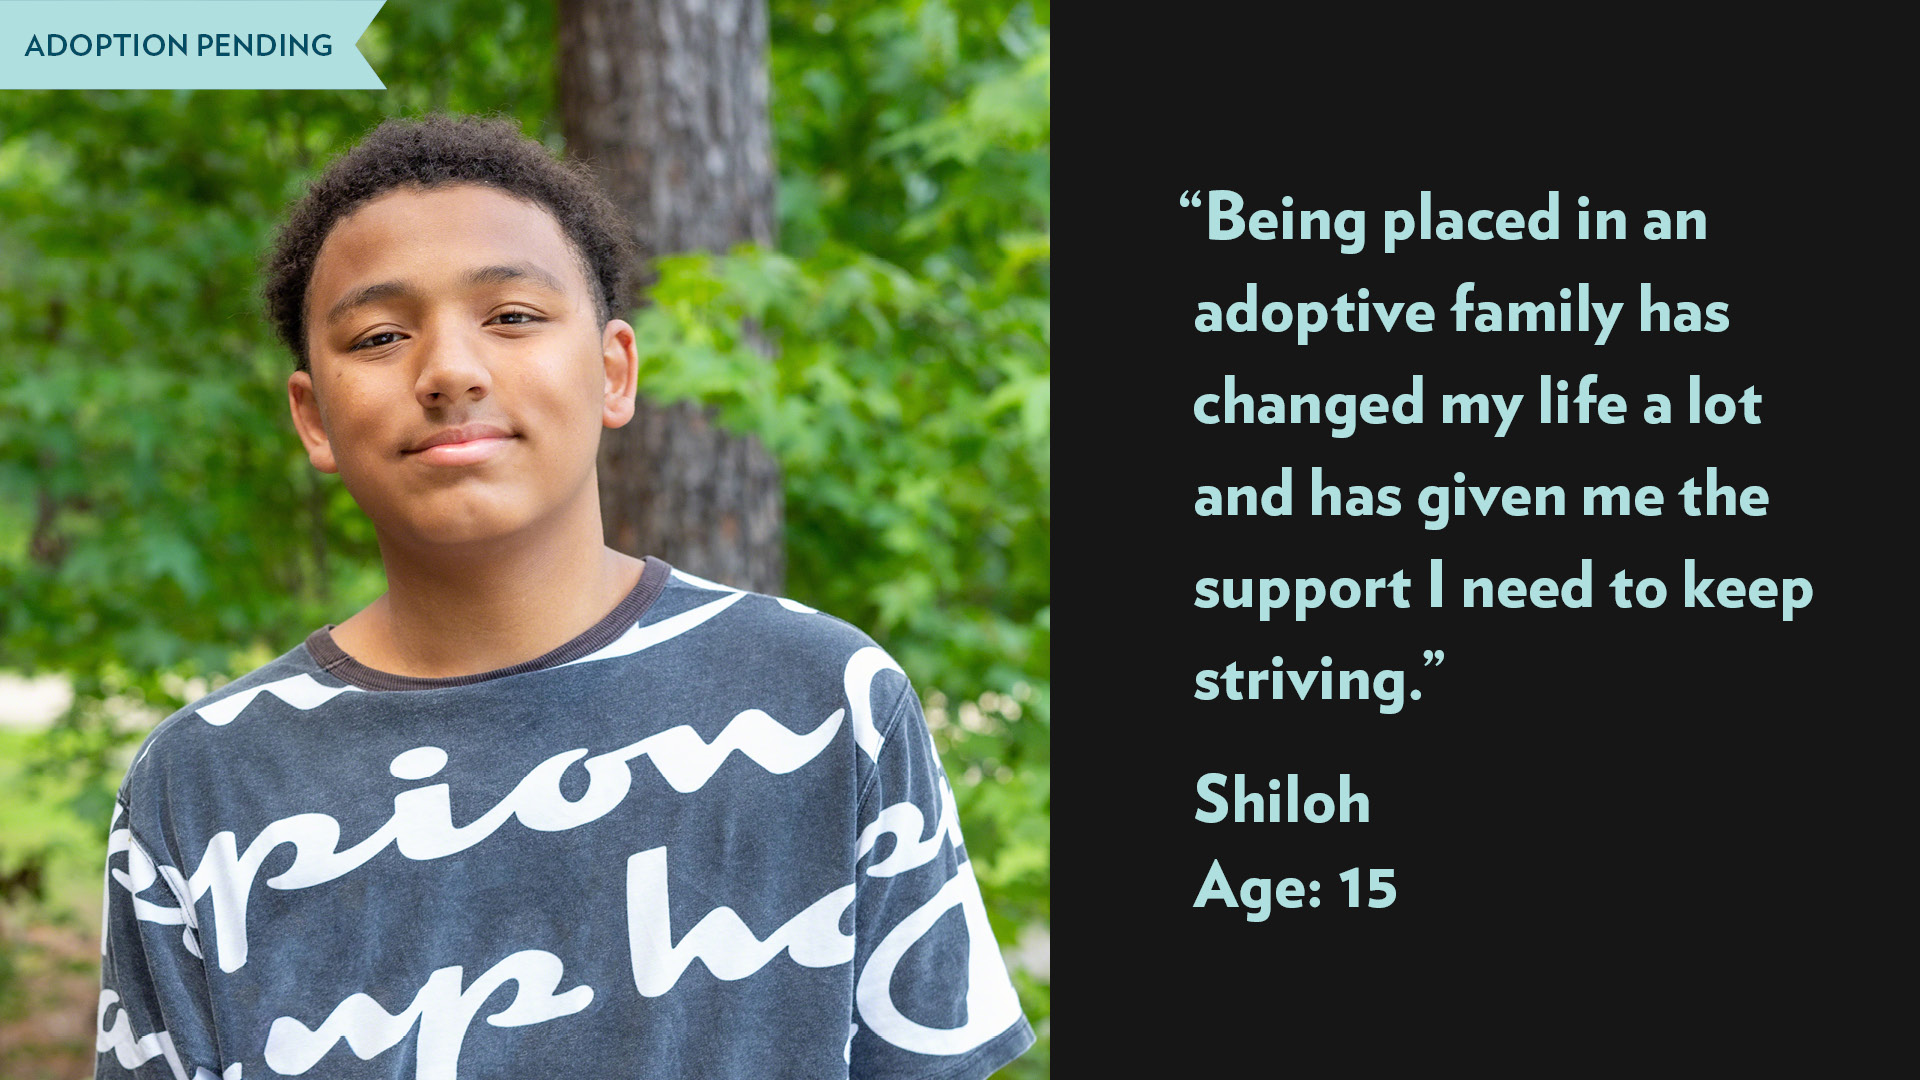 Being placed in an adoptive family has changed my life a lot and has given me the support I need to keep striving. Shiloh, age 15. Adoption pending. 